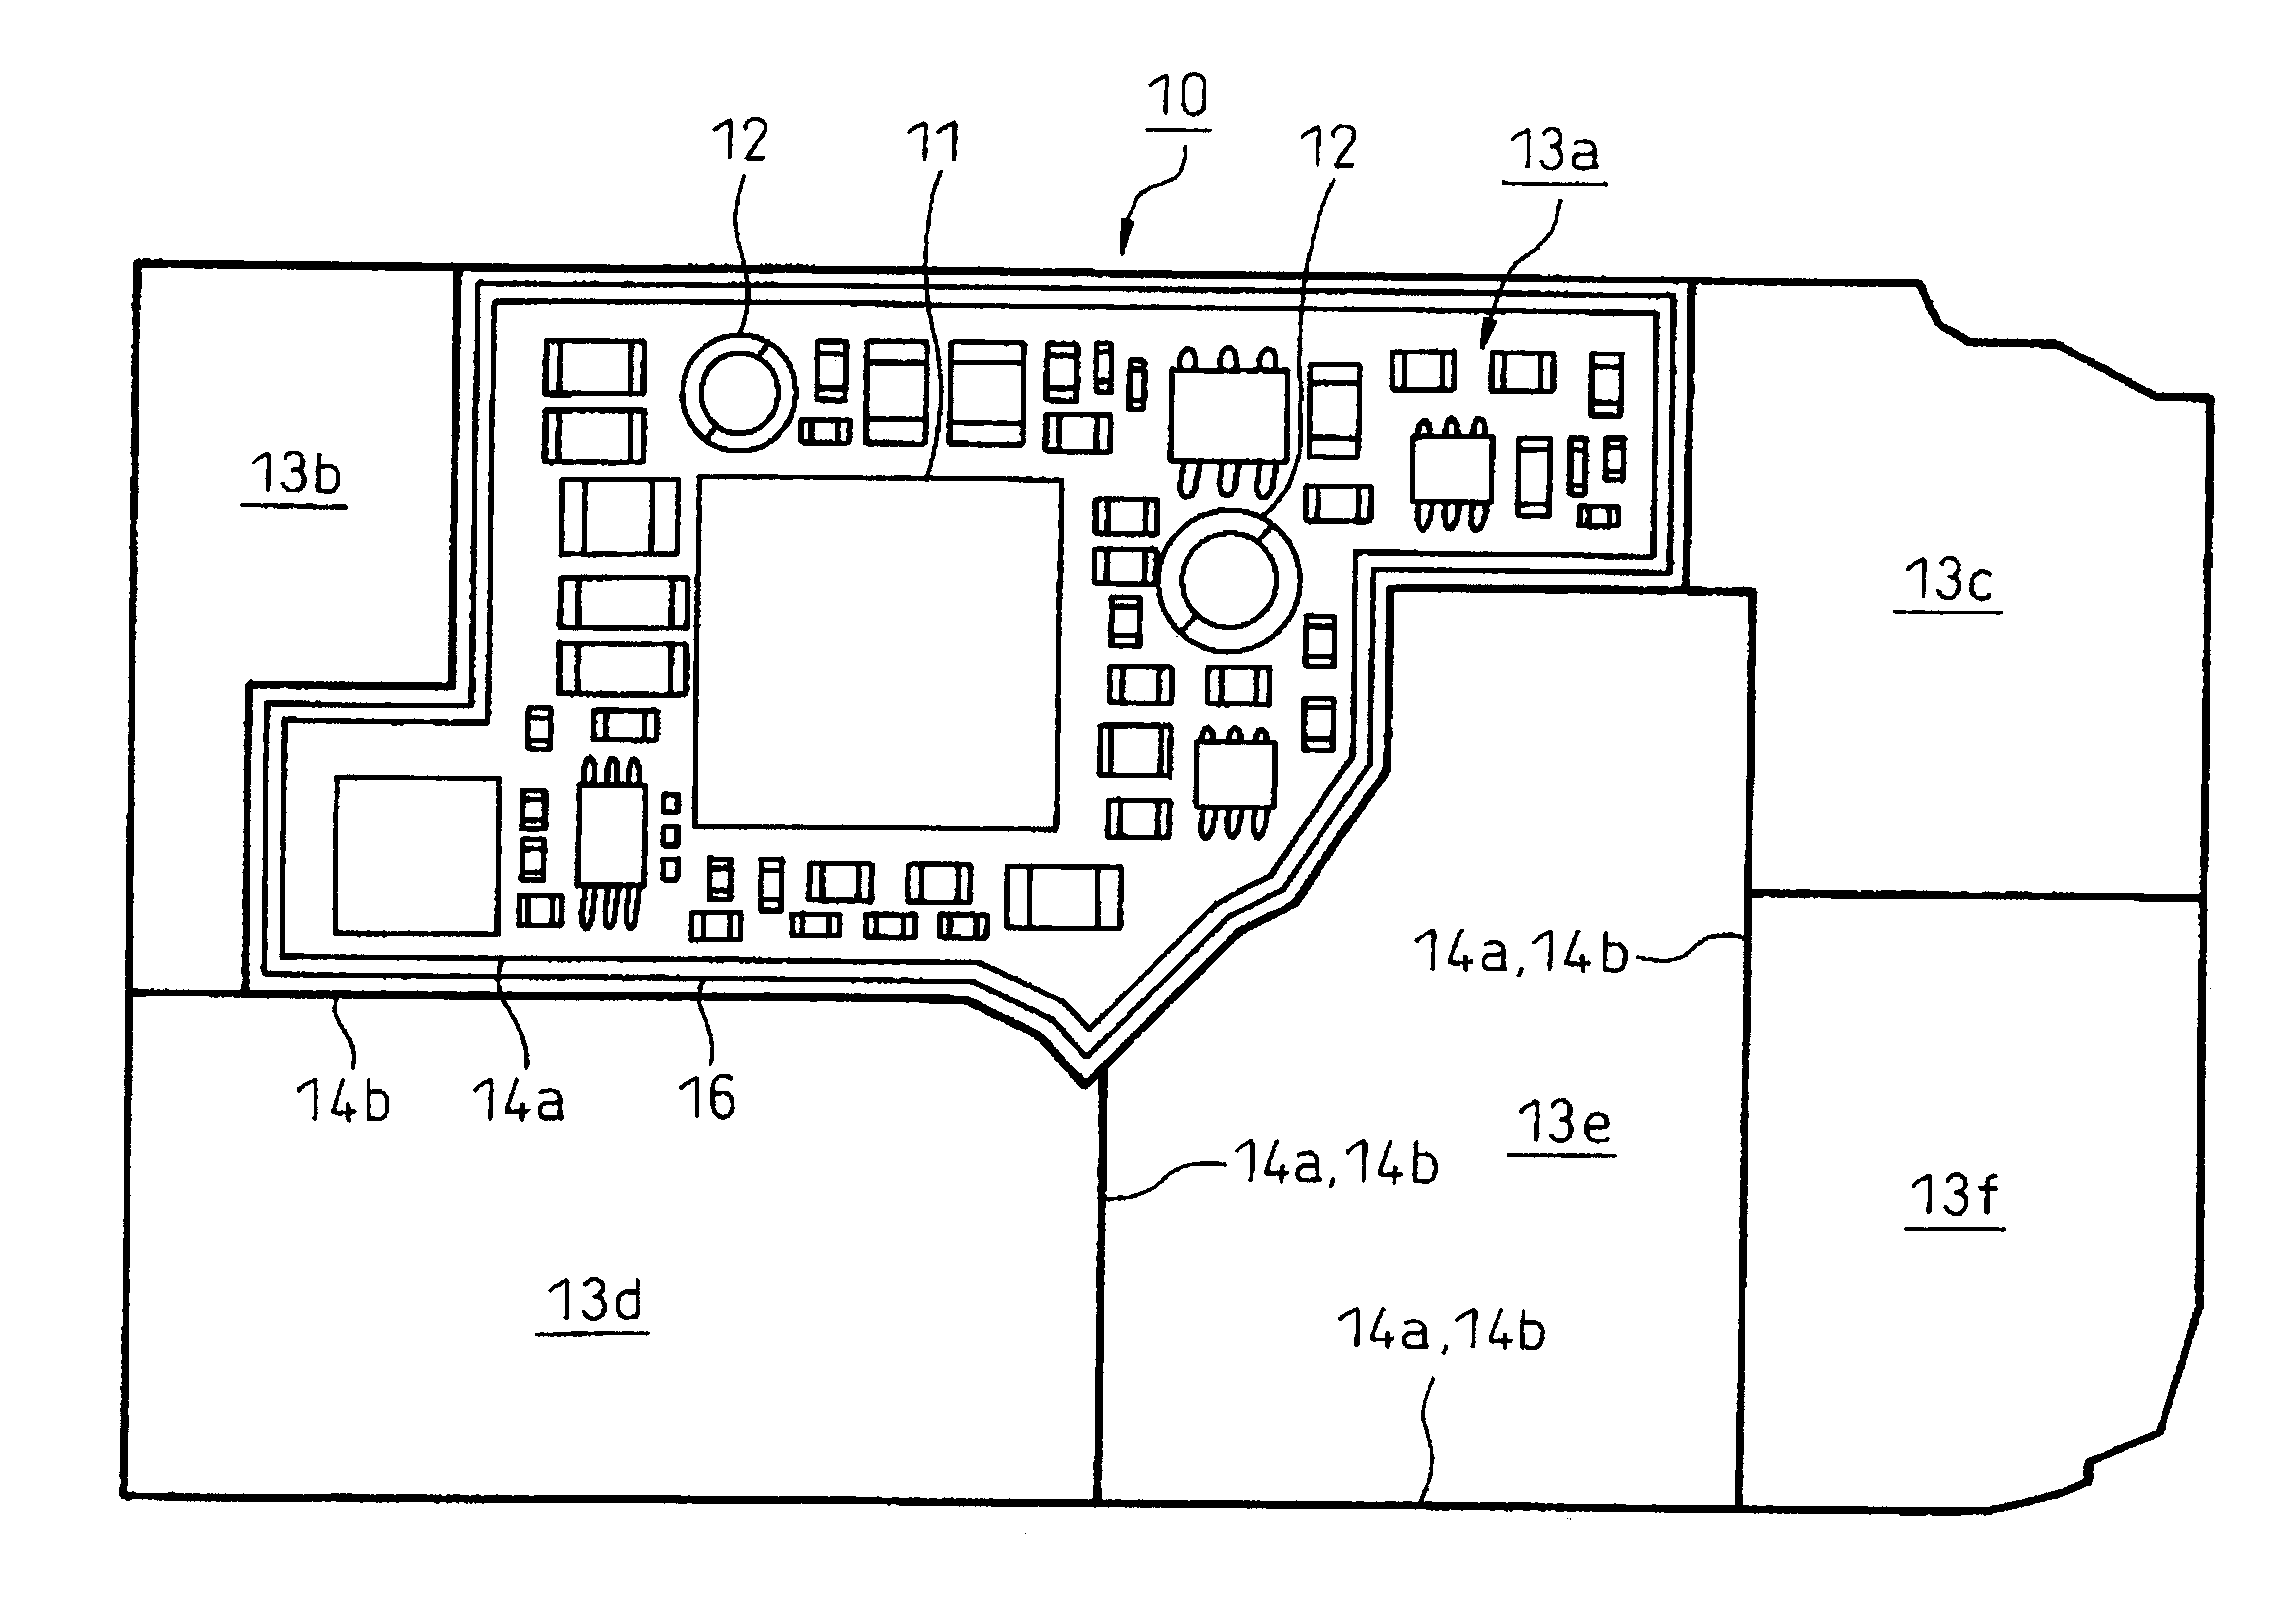 Inductor built-in wiring board having shield function